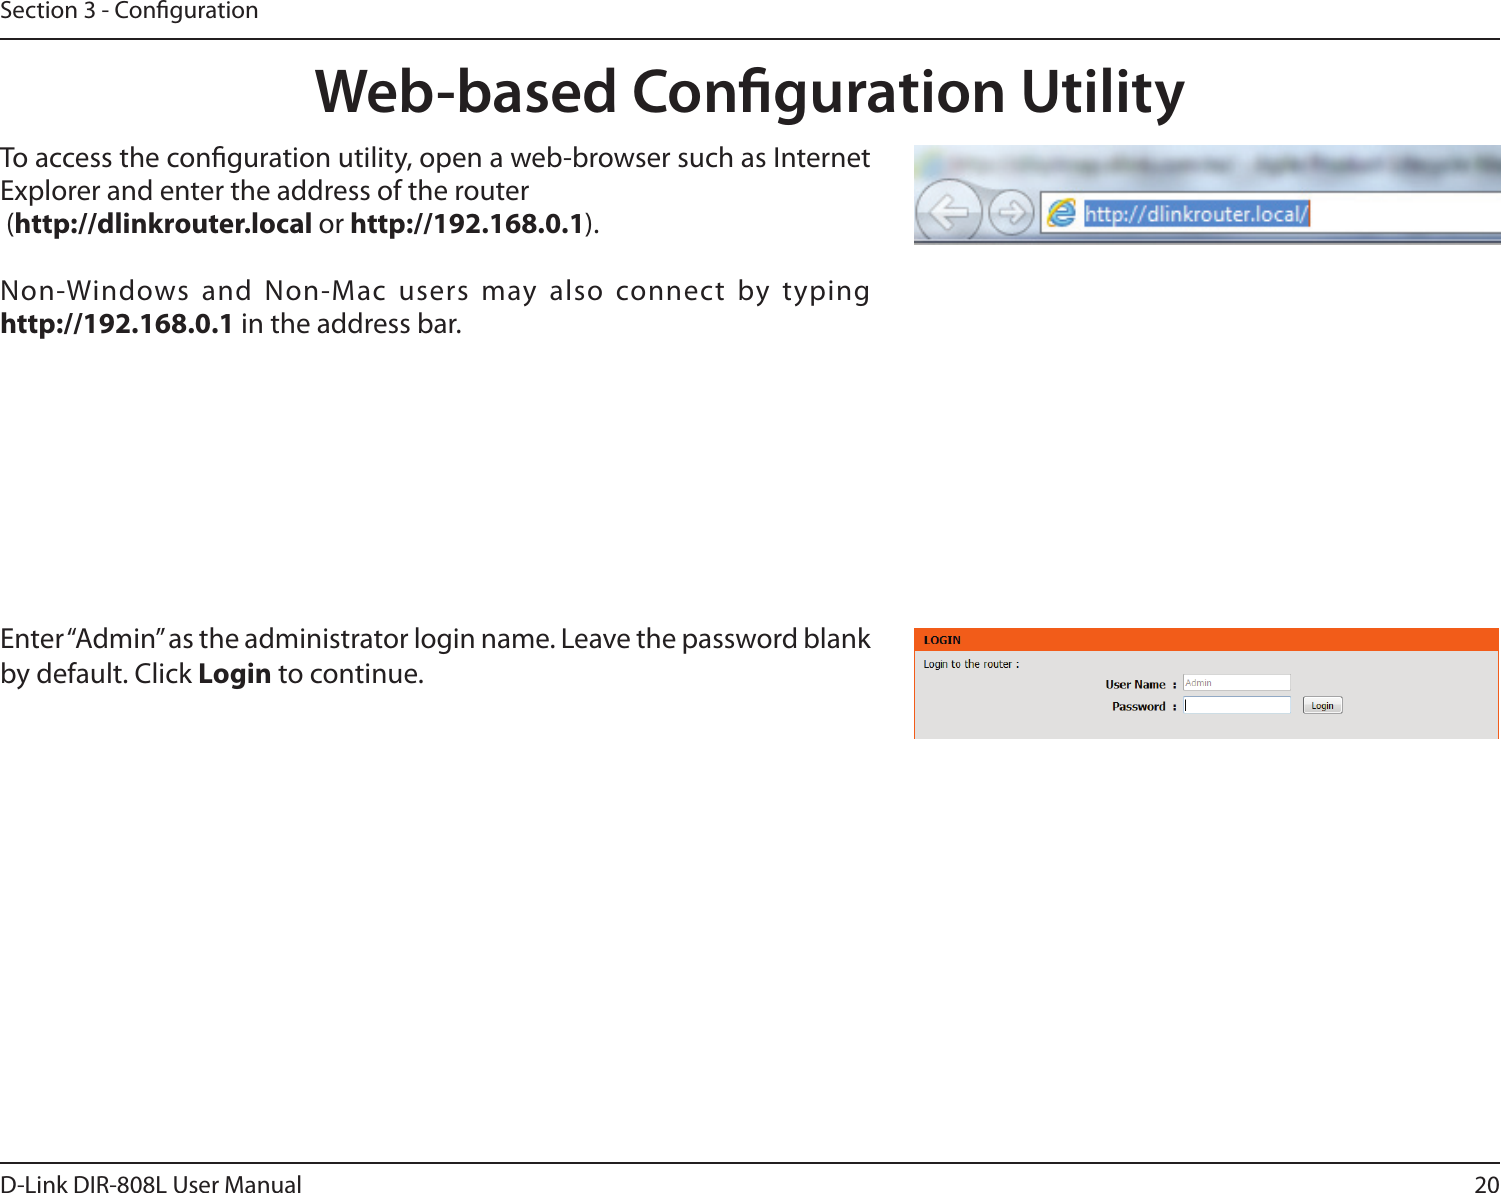 20D-Link DIR-808L User ManualSection 3 - CongurationWeb-based Conguration UtilityEnter “Admin” as the administrator login name. Leave the password blank by default. Click Login to continue. To access the conguration utility, open a web-browser such as Internet Explorer and enter the address of the router (http://dlinkrouter.local or http://192.168.0.1).Non-Windows  and  Non-Mac  users  may also connect  by typing http://192.168.0.1 in the address bar.